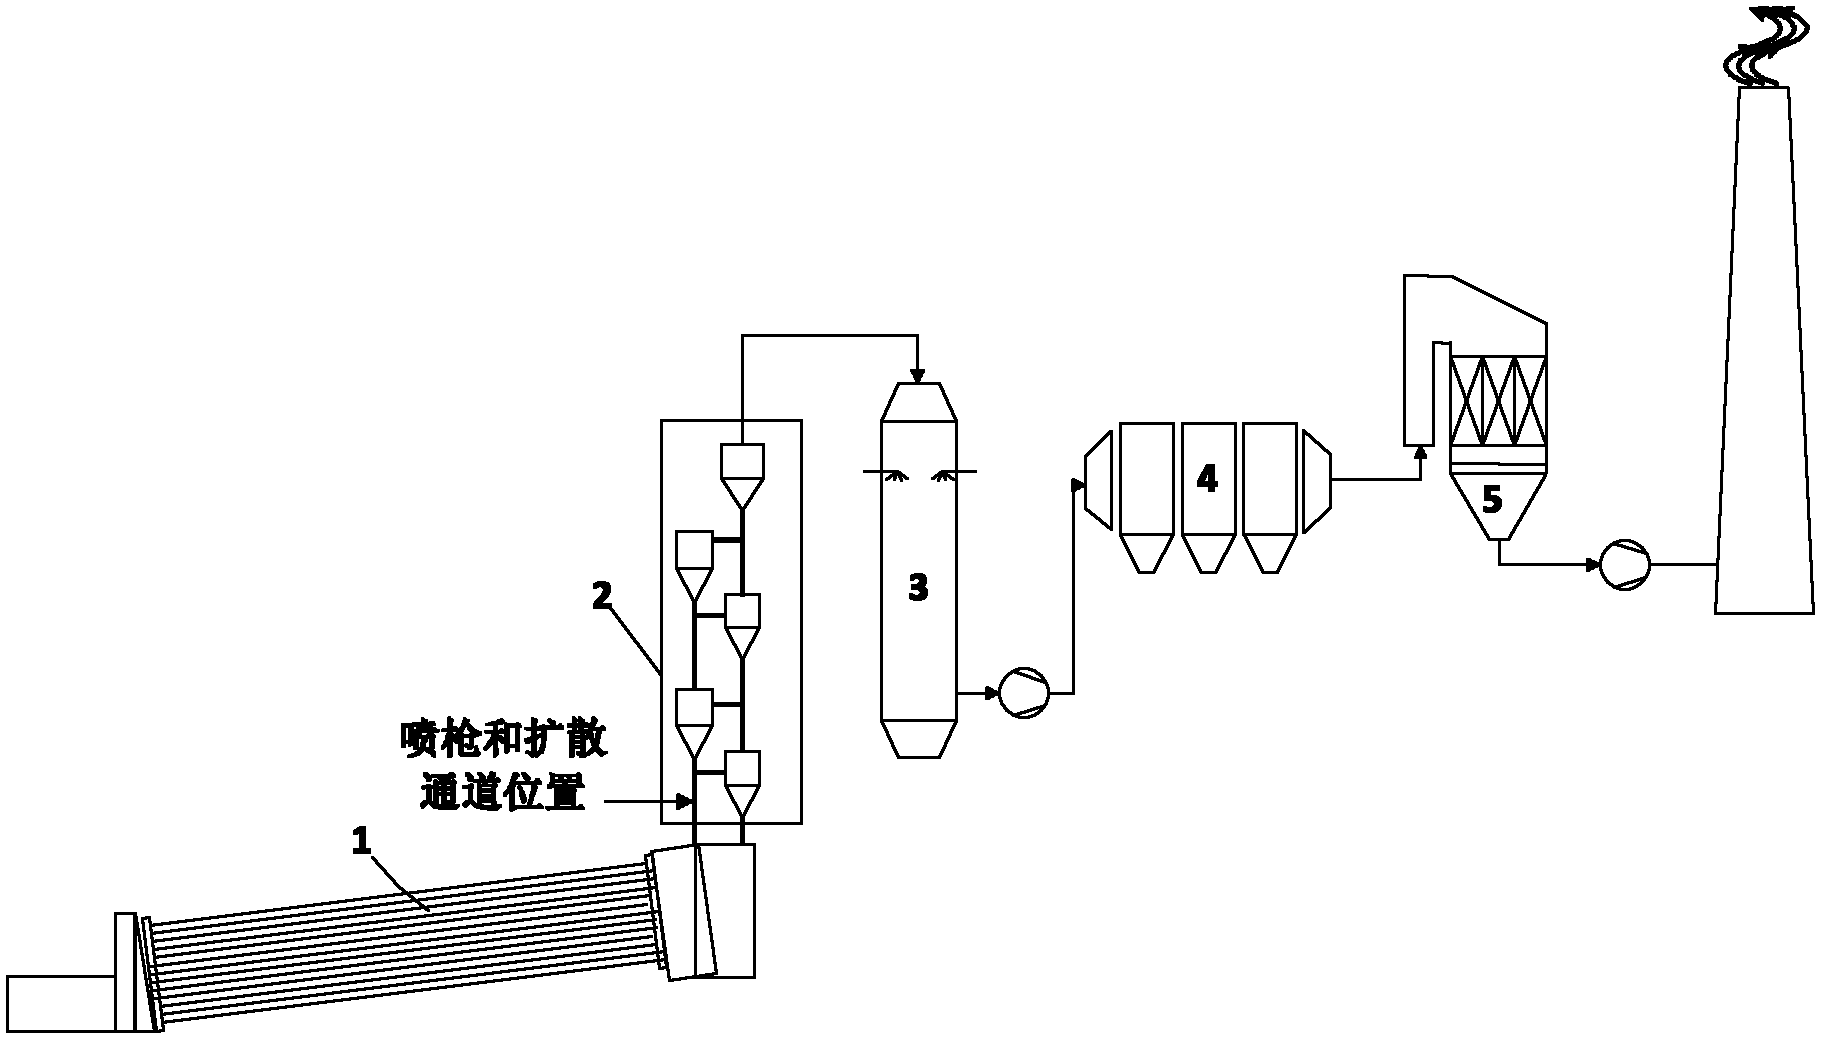 Denitration process and denitration apparatus for cement kiln flue gas